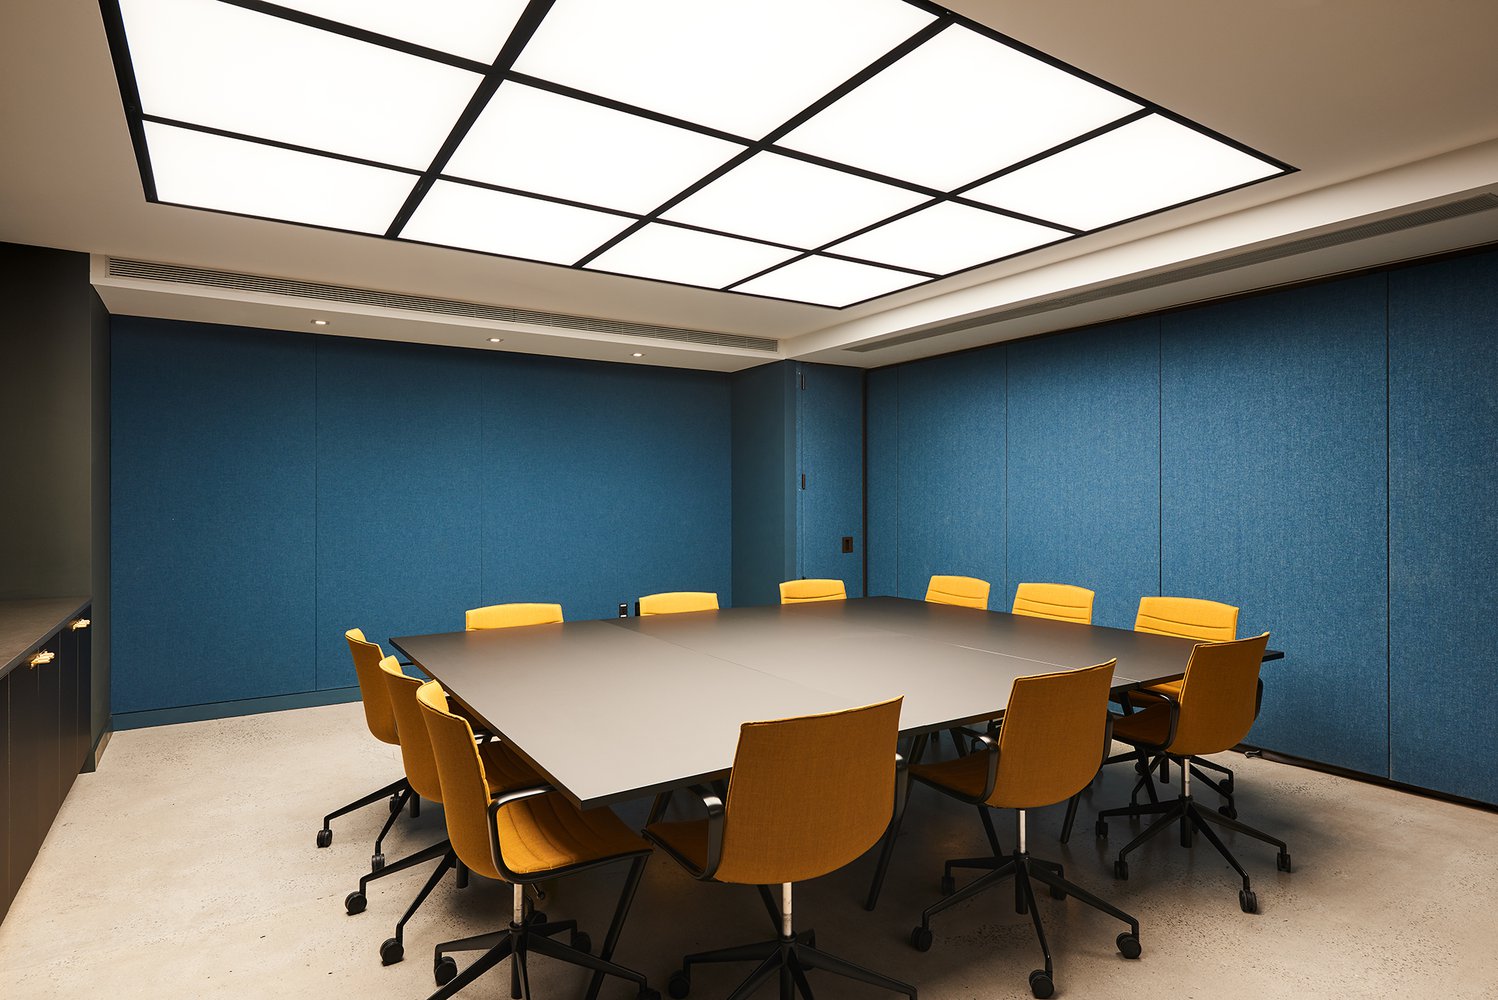 Square shaped conference room table with chairs